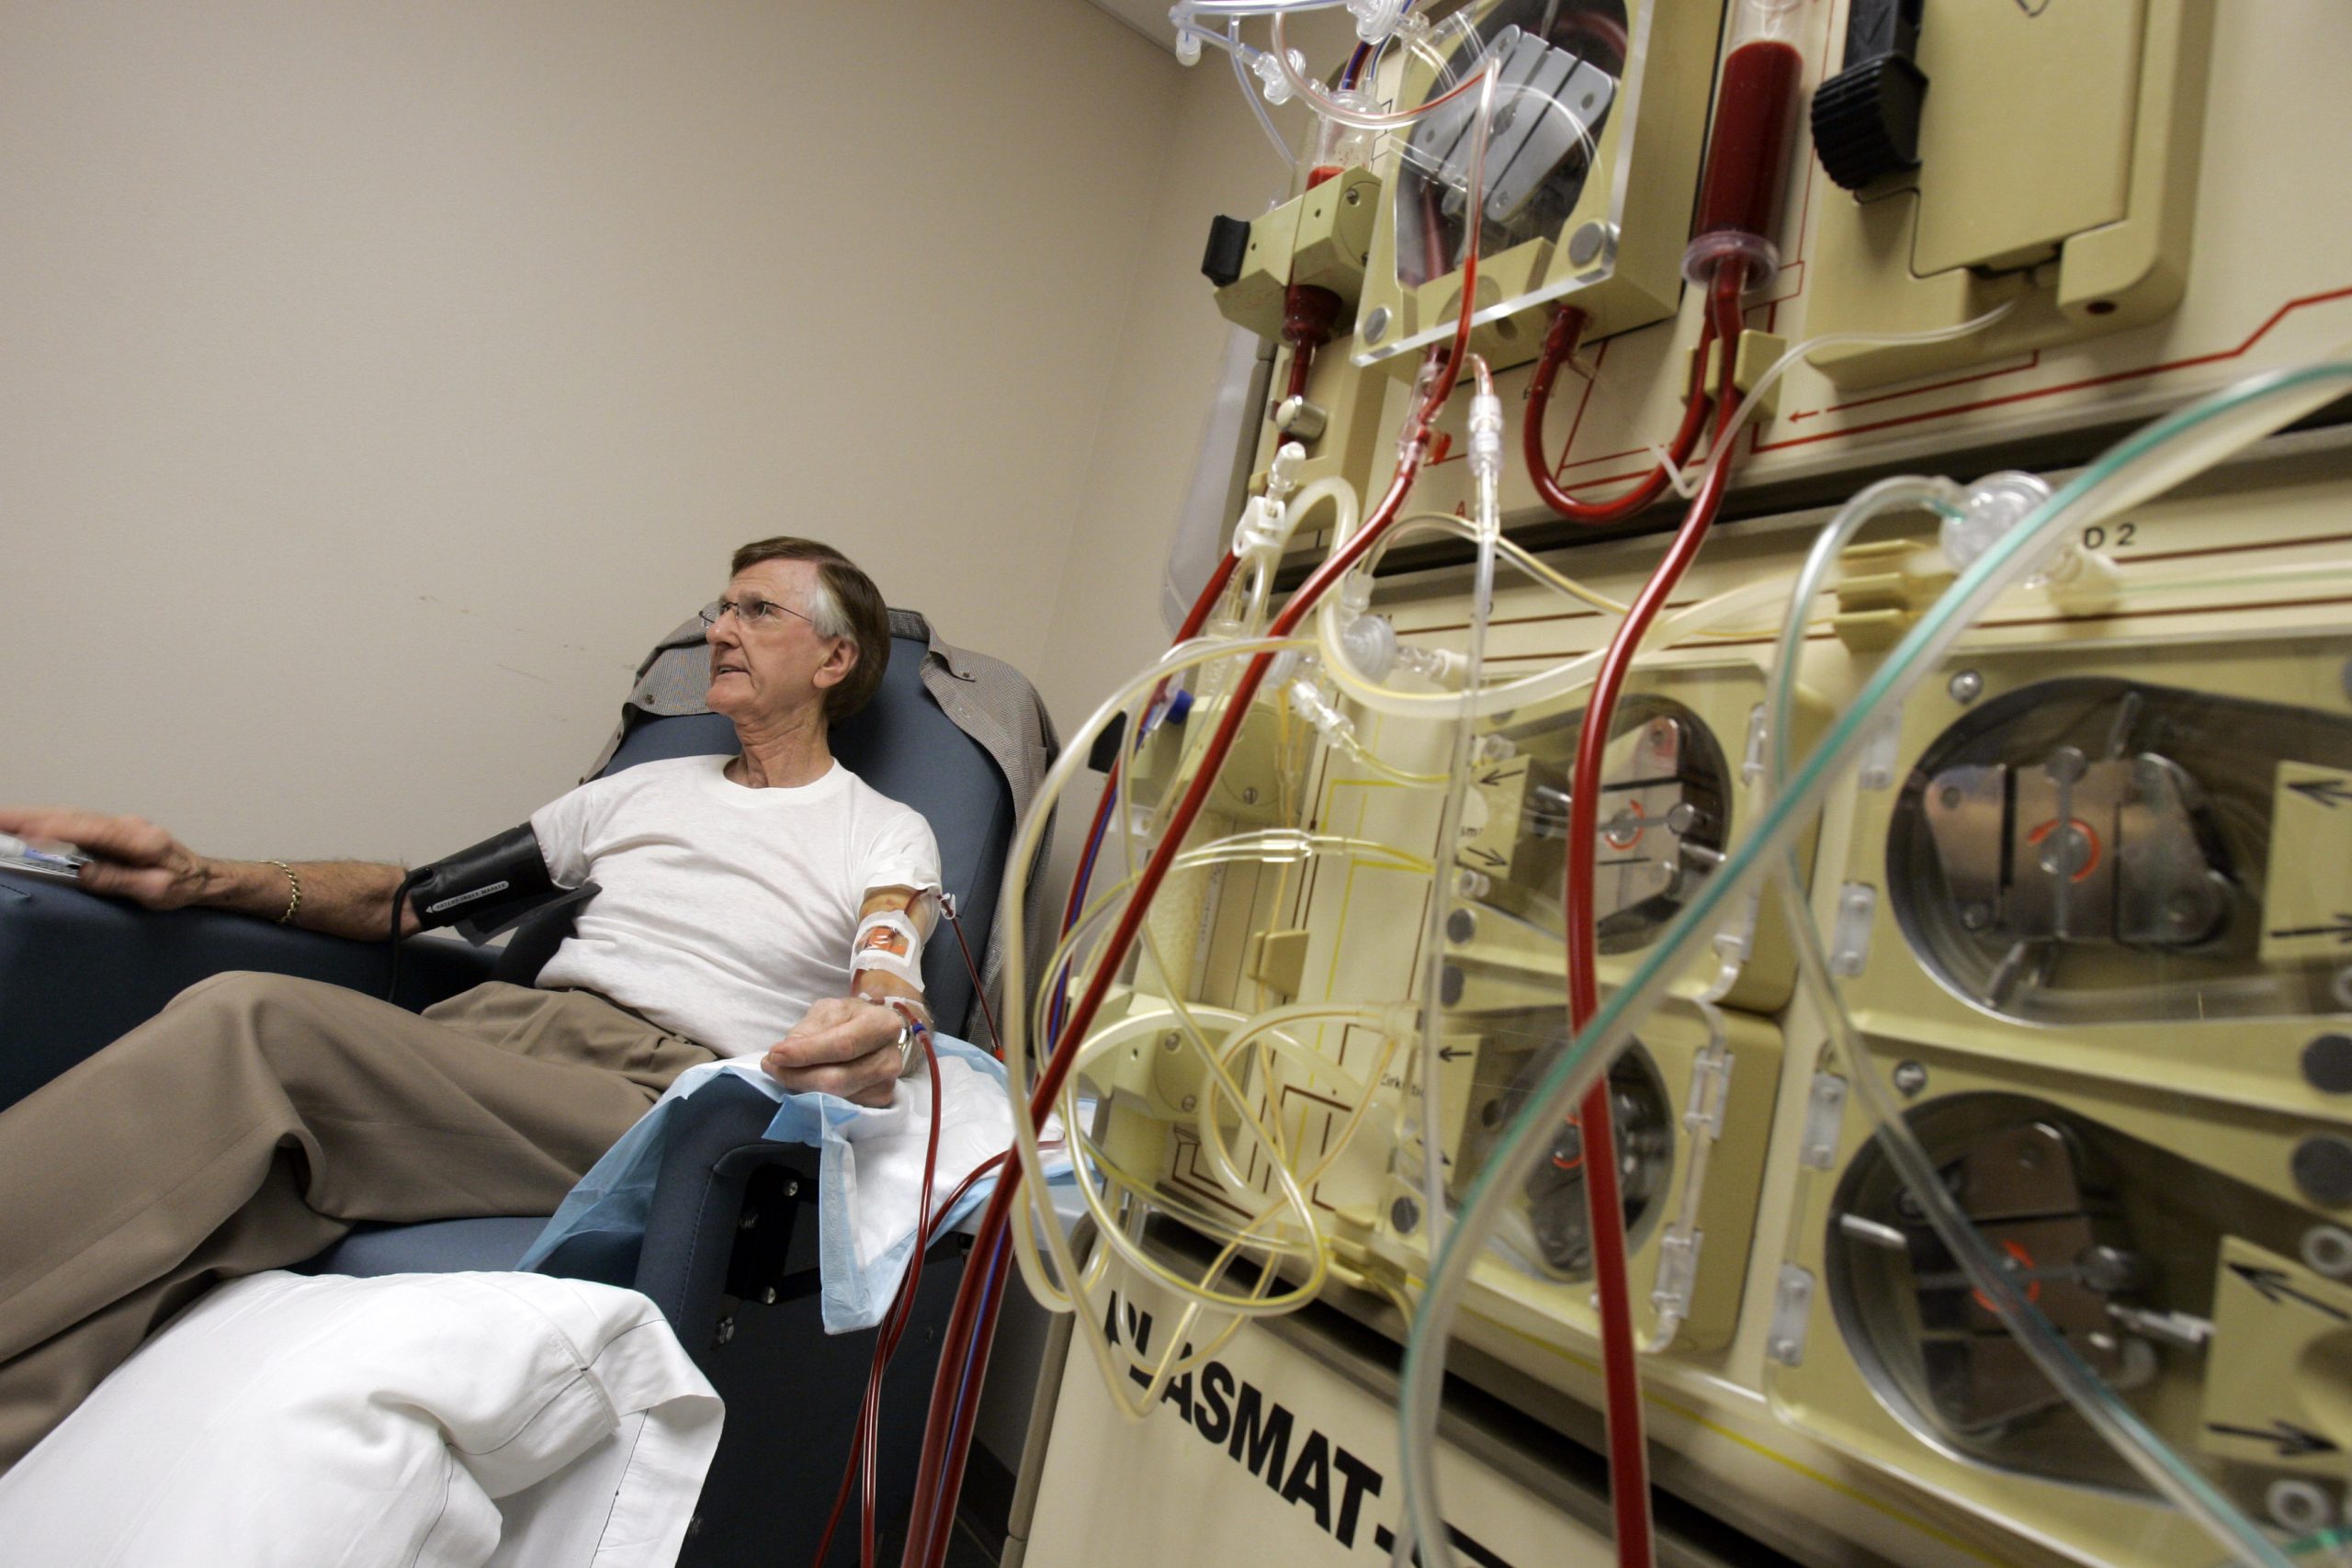 Oklahoma Blood Institute welcomes convalescent plasma donors